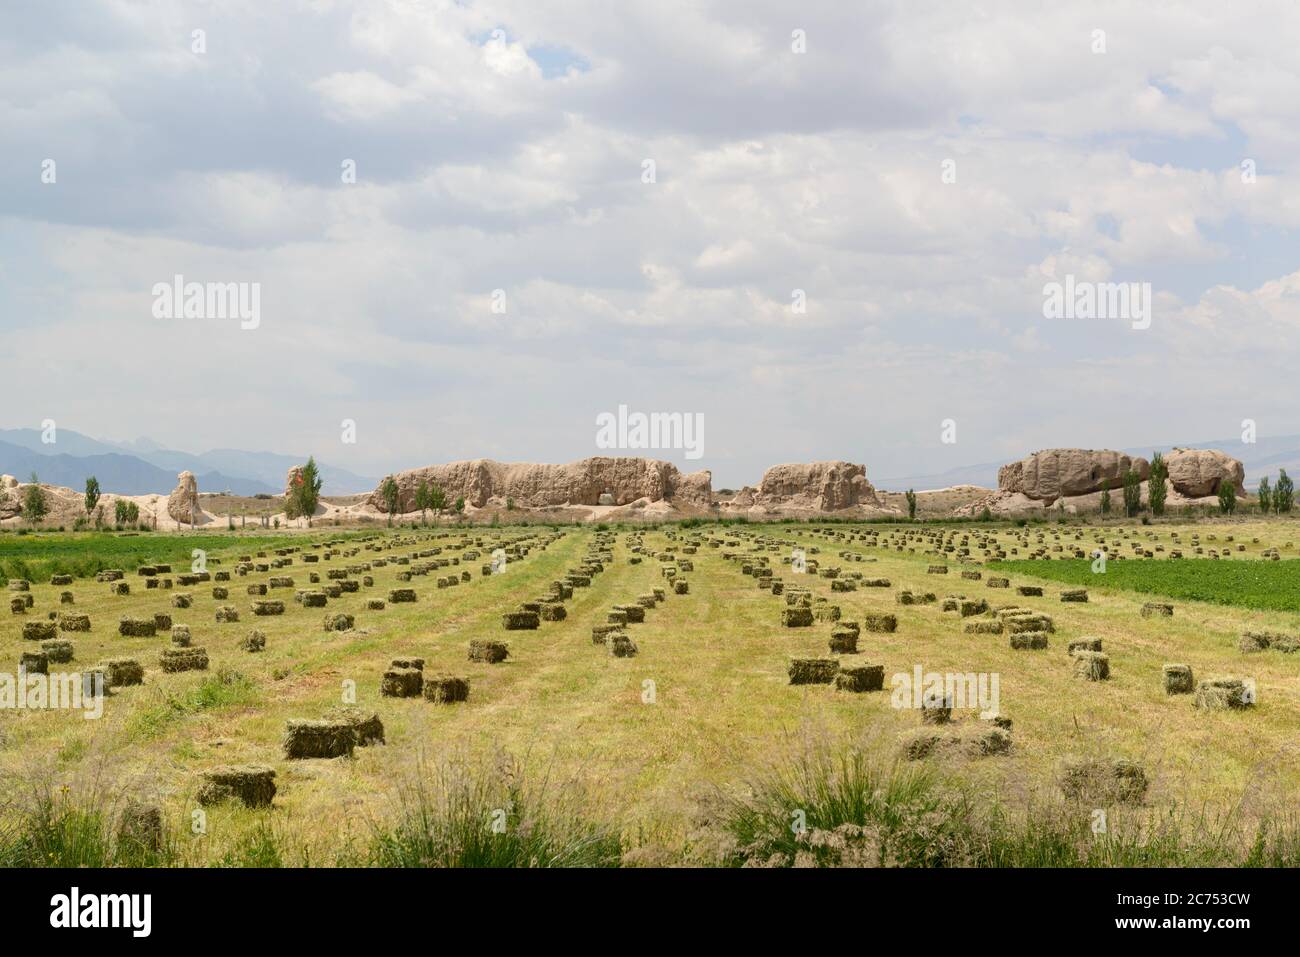 Haybales in front of the ruins of Koshoy-Korgon, Kyrgyzstan Stock Photo